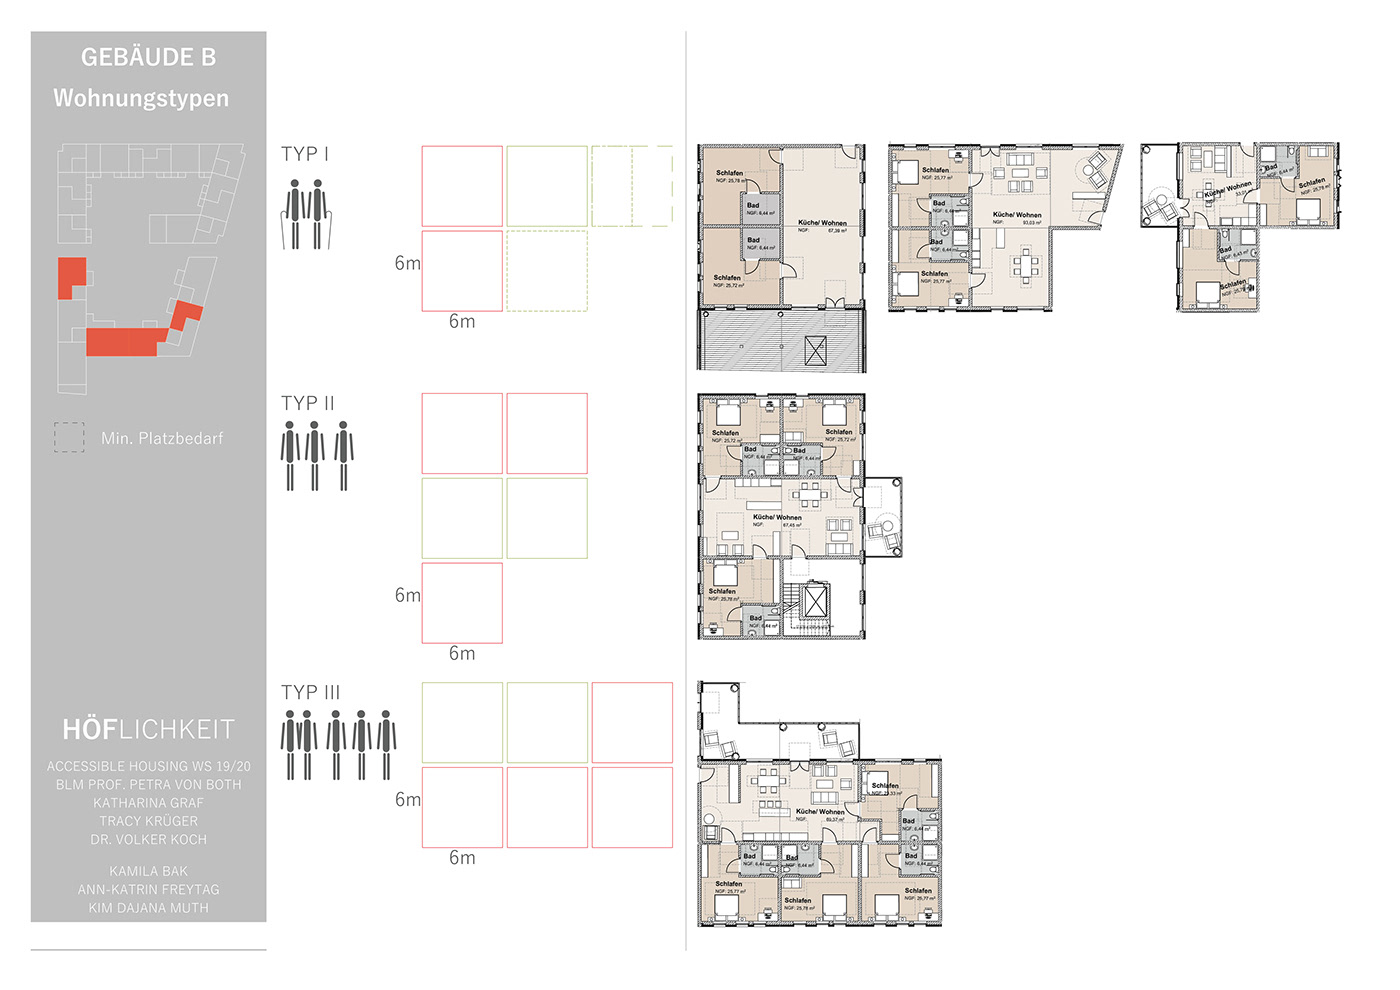 Accessible Housing ArchiCAD architecture bim-based design co-living karlsruhe Master student